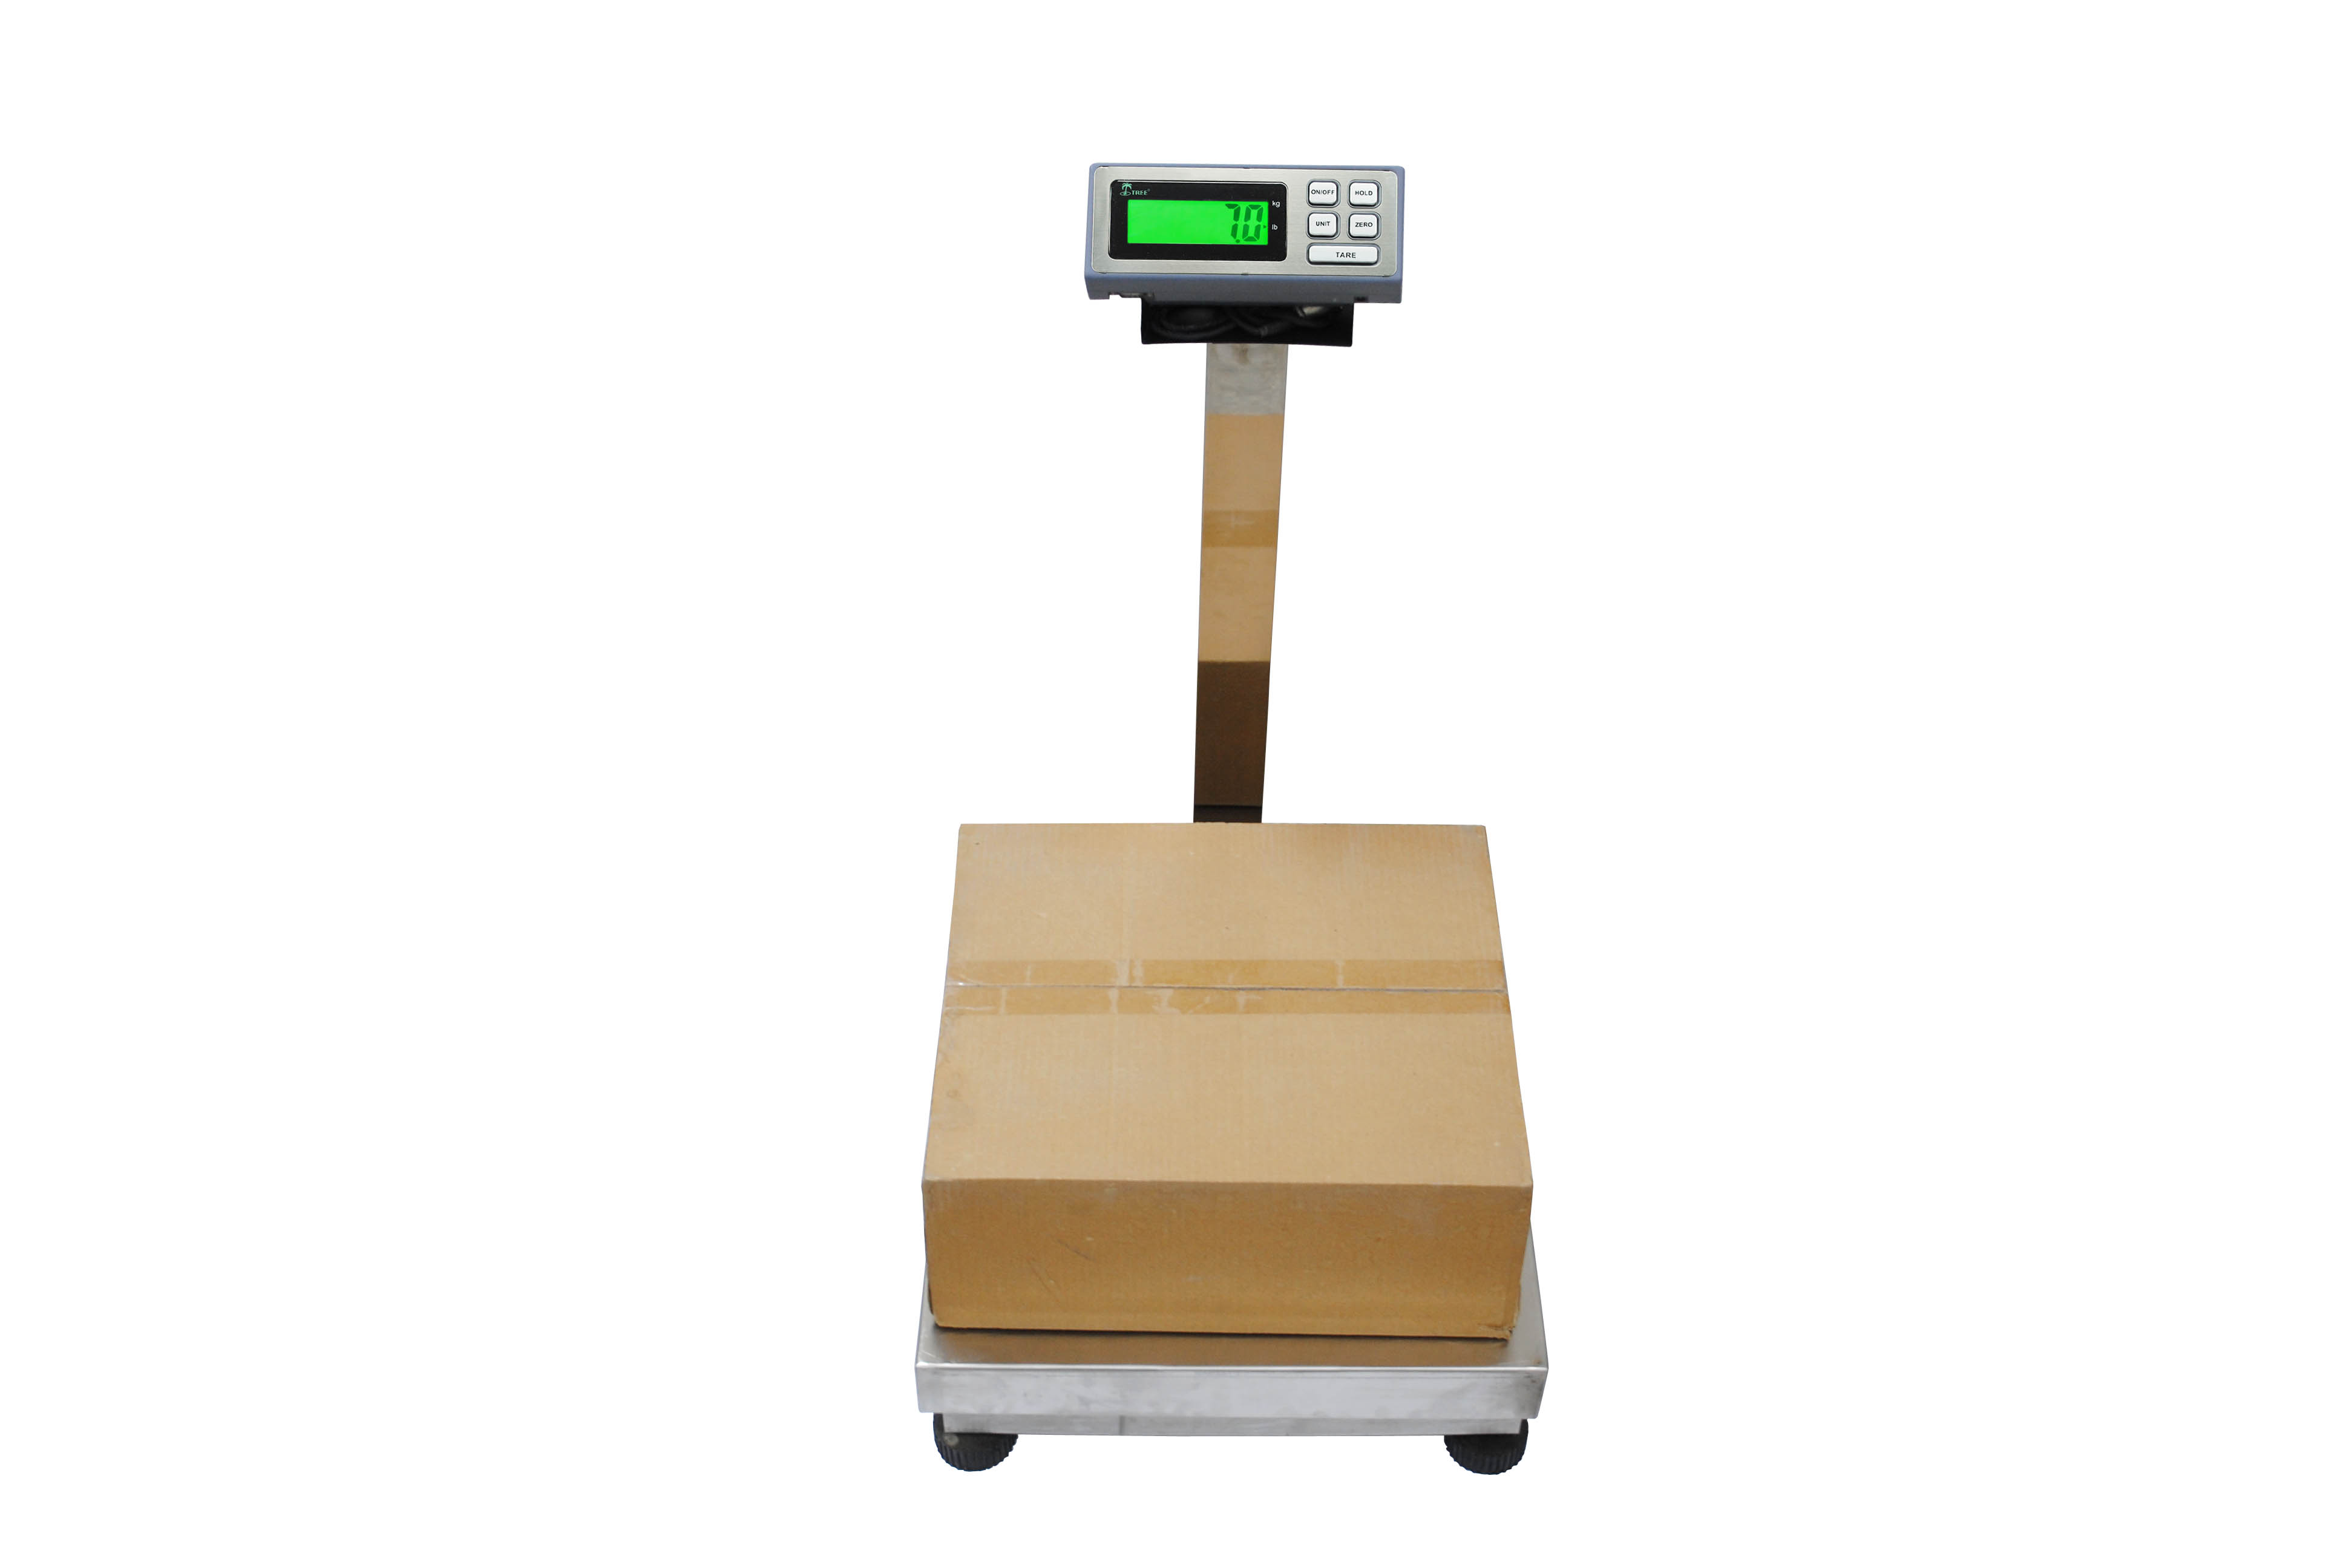 TCS-N 300kg/100g bench scale floor scale